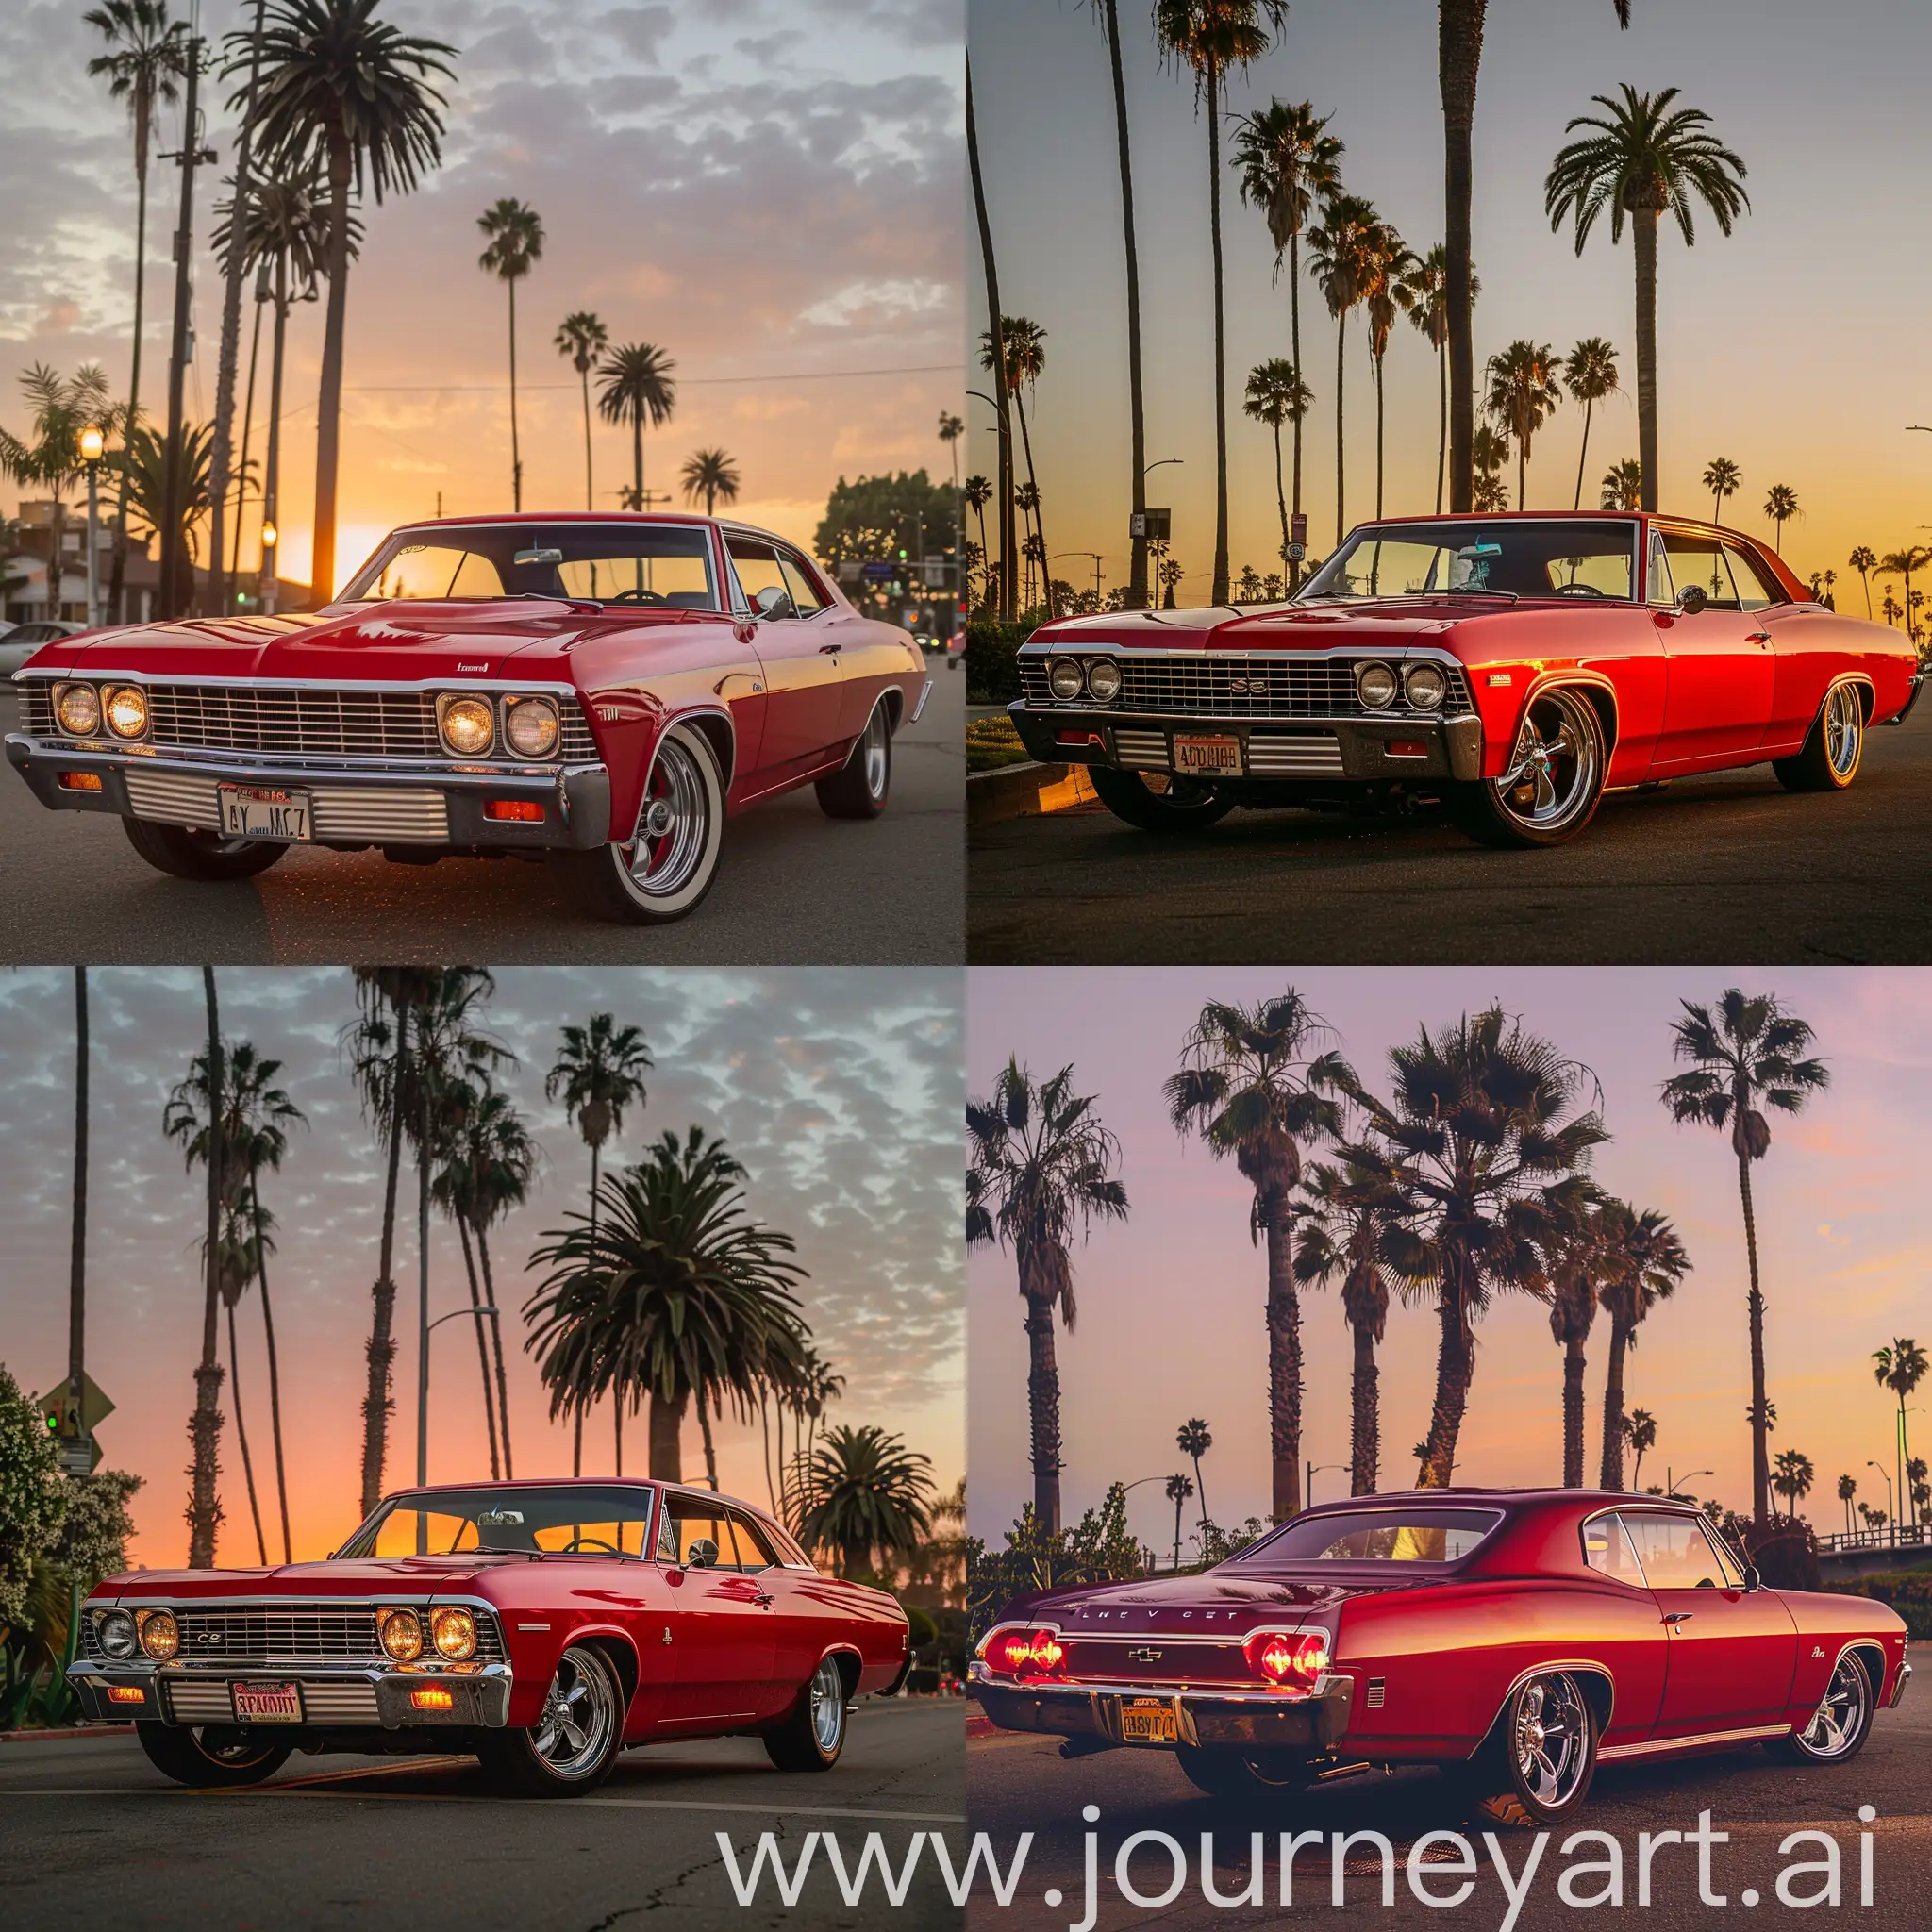 Classic-1969-Chevrolet-Impala-at-California-Sunset-with-Palm-Trees